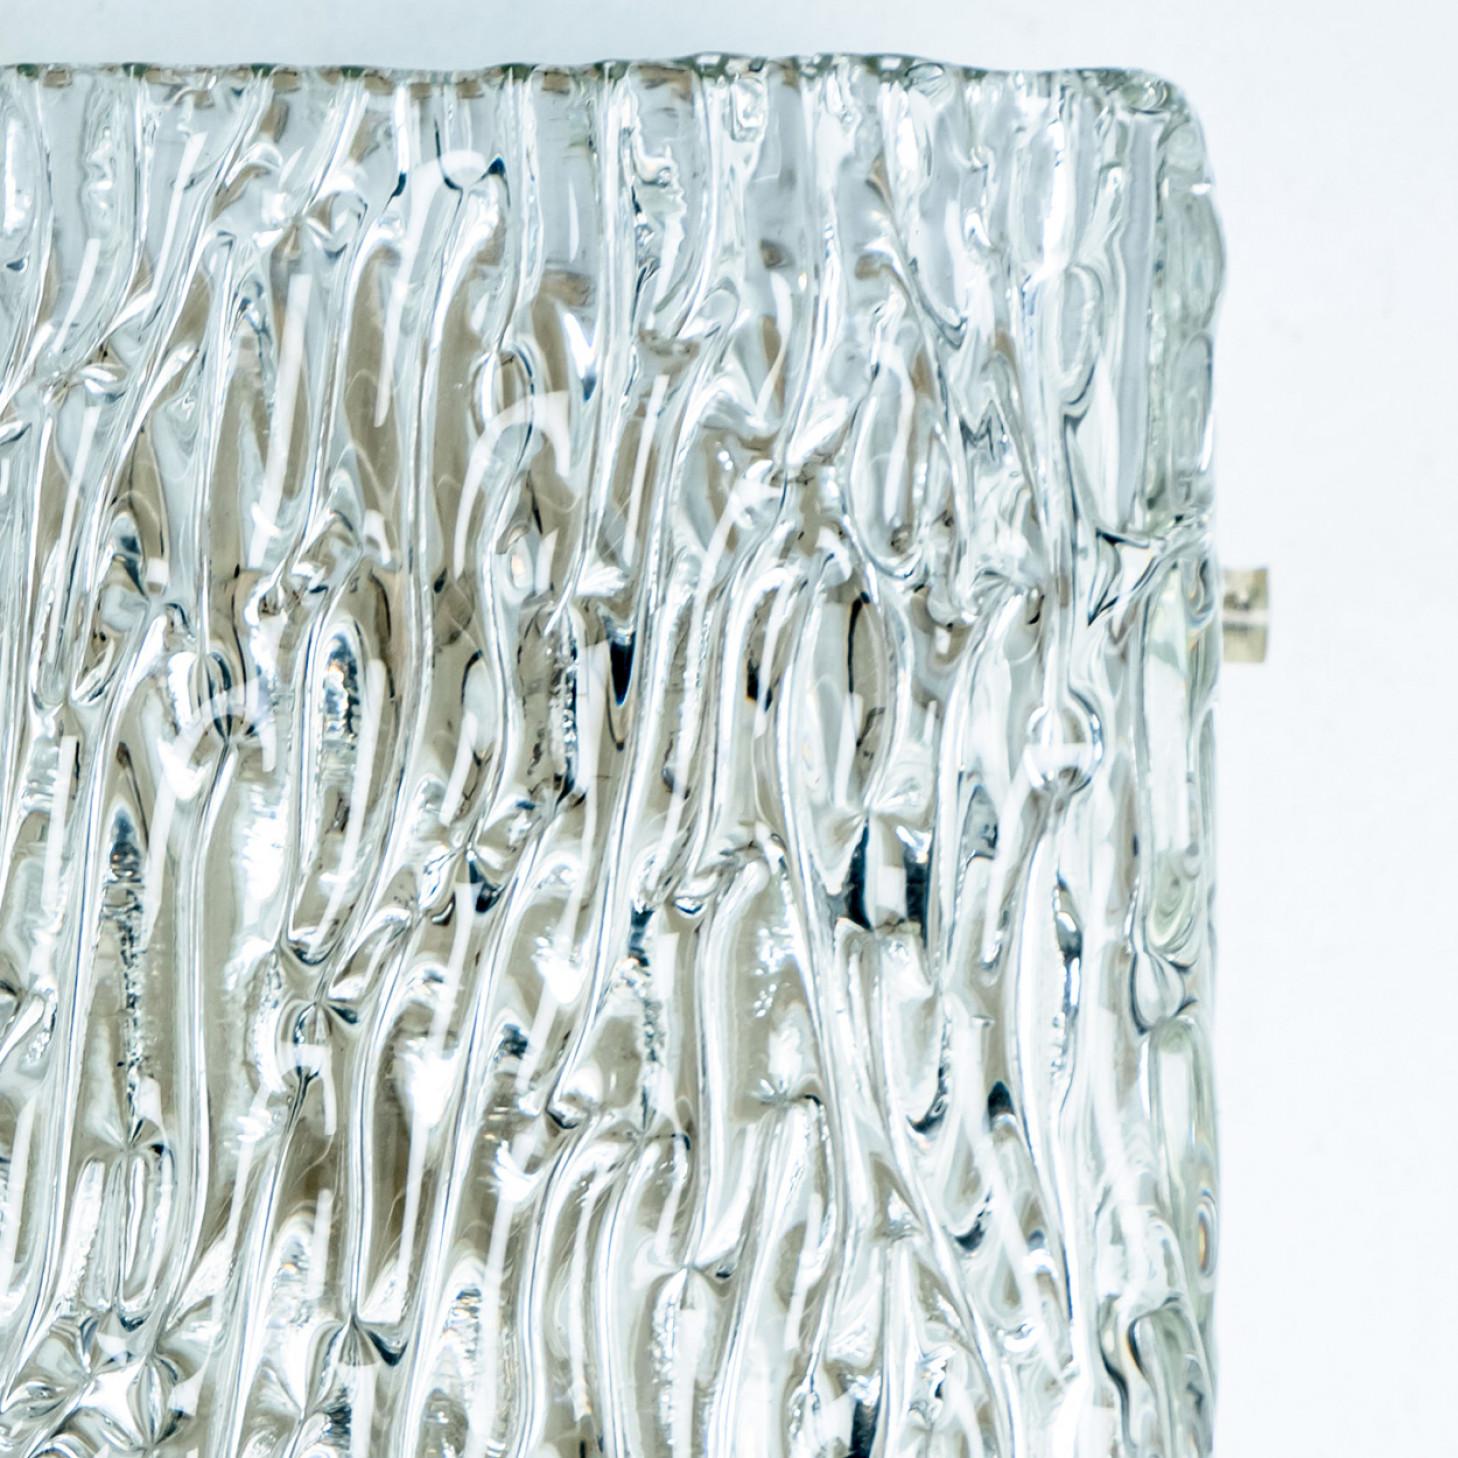 Other 1 of 4 Textured Wave Glass Wall Lights by Kalmar Leuchten, 1970s For Sale